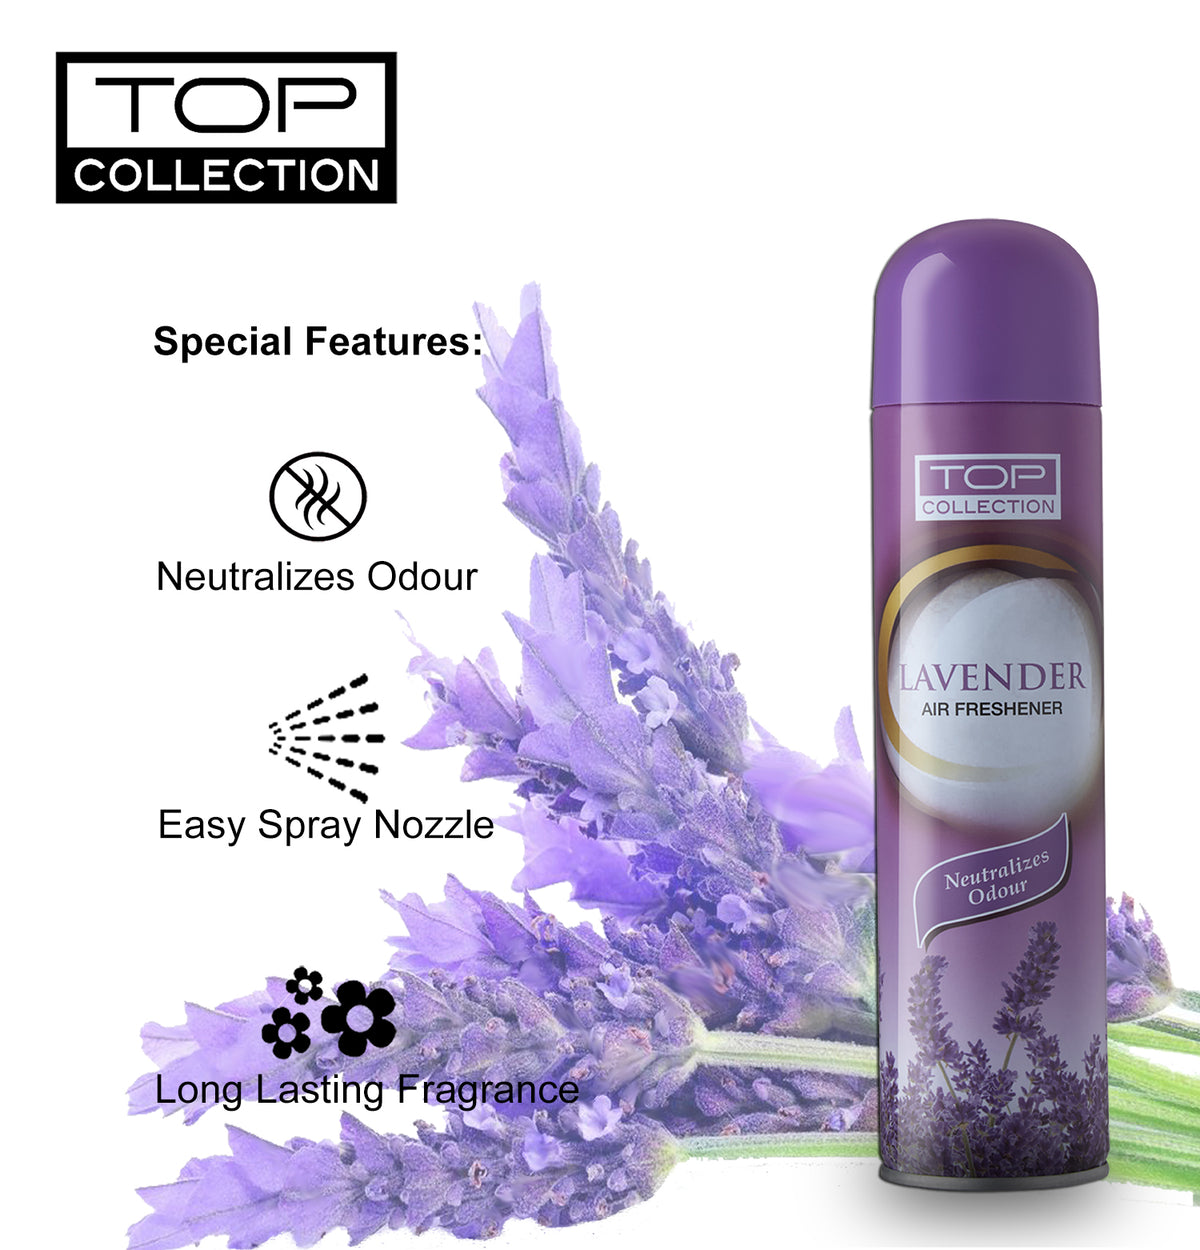 Top Collection Air Freshener - Lavender, 300ml